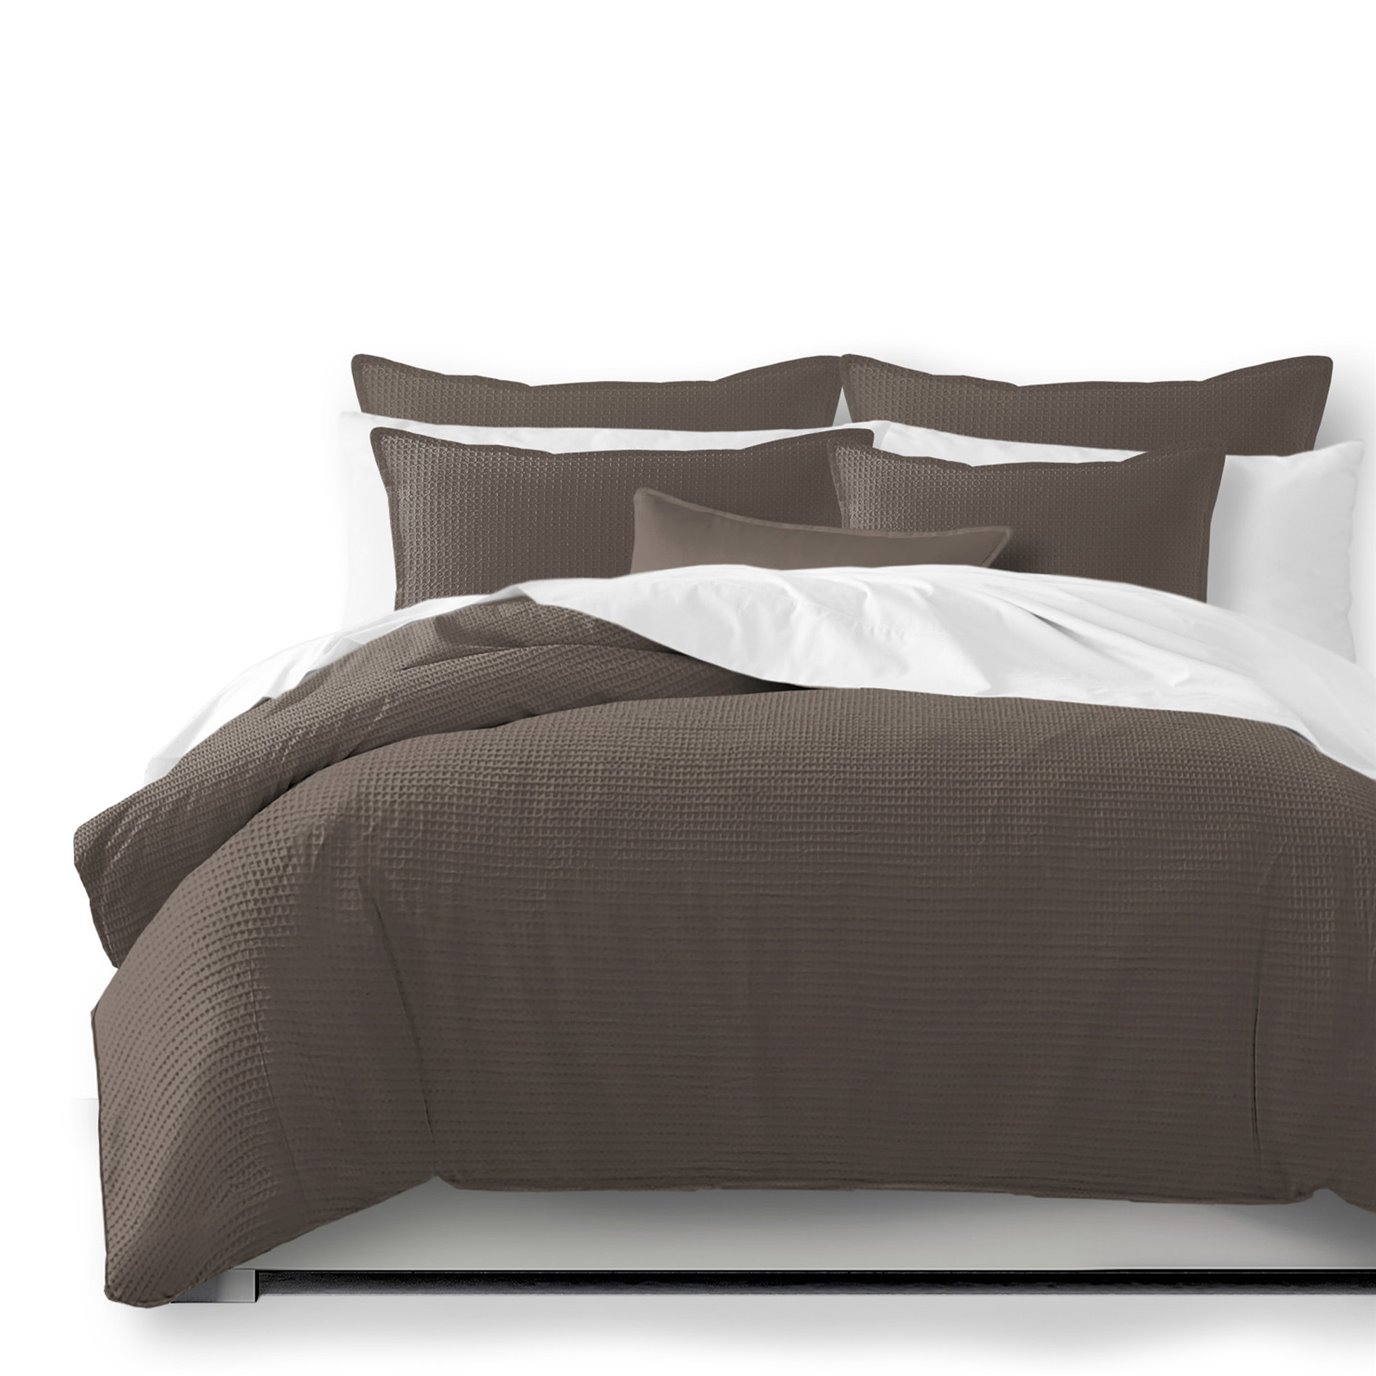 Classic Waffle Mocca Coverlet and Pillow Sham(s) Set - Size Super Queen